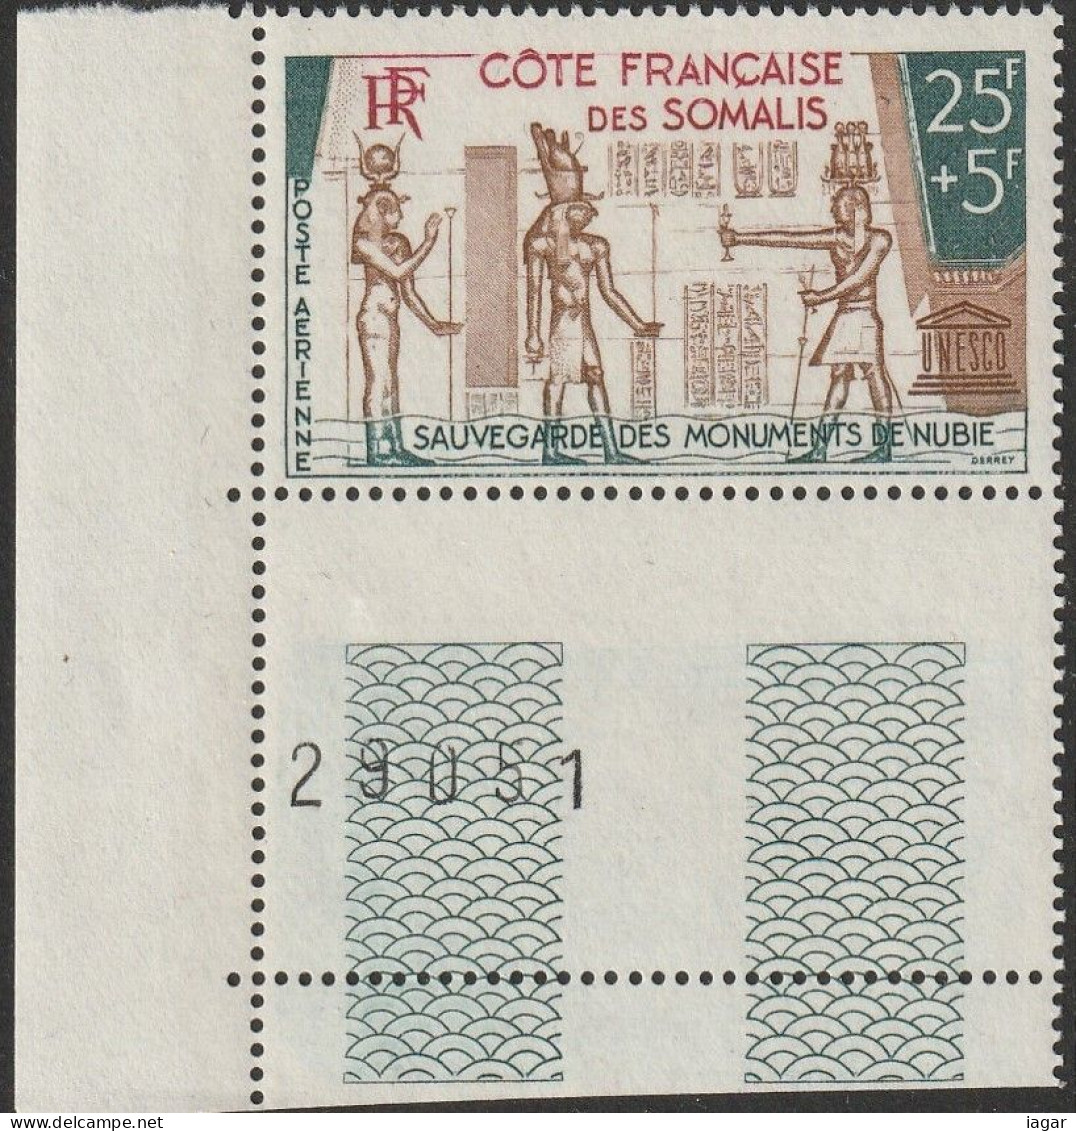 THEMATIC EGYPTOLOGY:  UNESCO. SAFEGUARDING THE MONUMENTS OF NUBIA. CORNER STAMP WITH CODE  -  COTE DES SOMALIS - Egyptologie